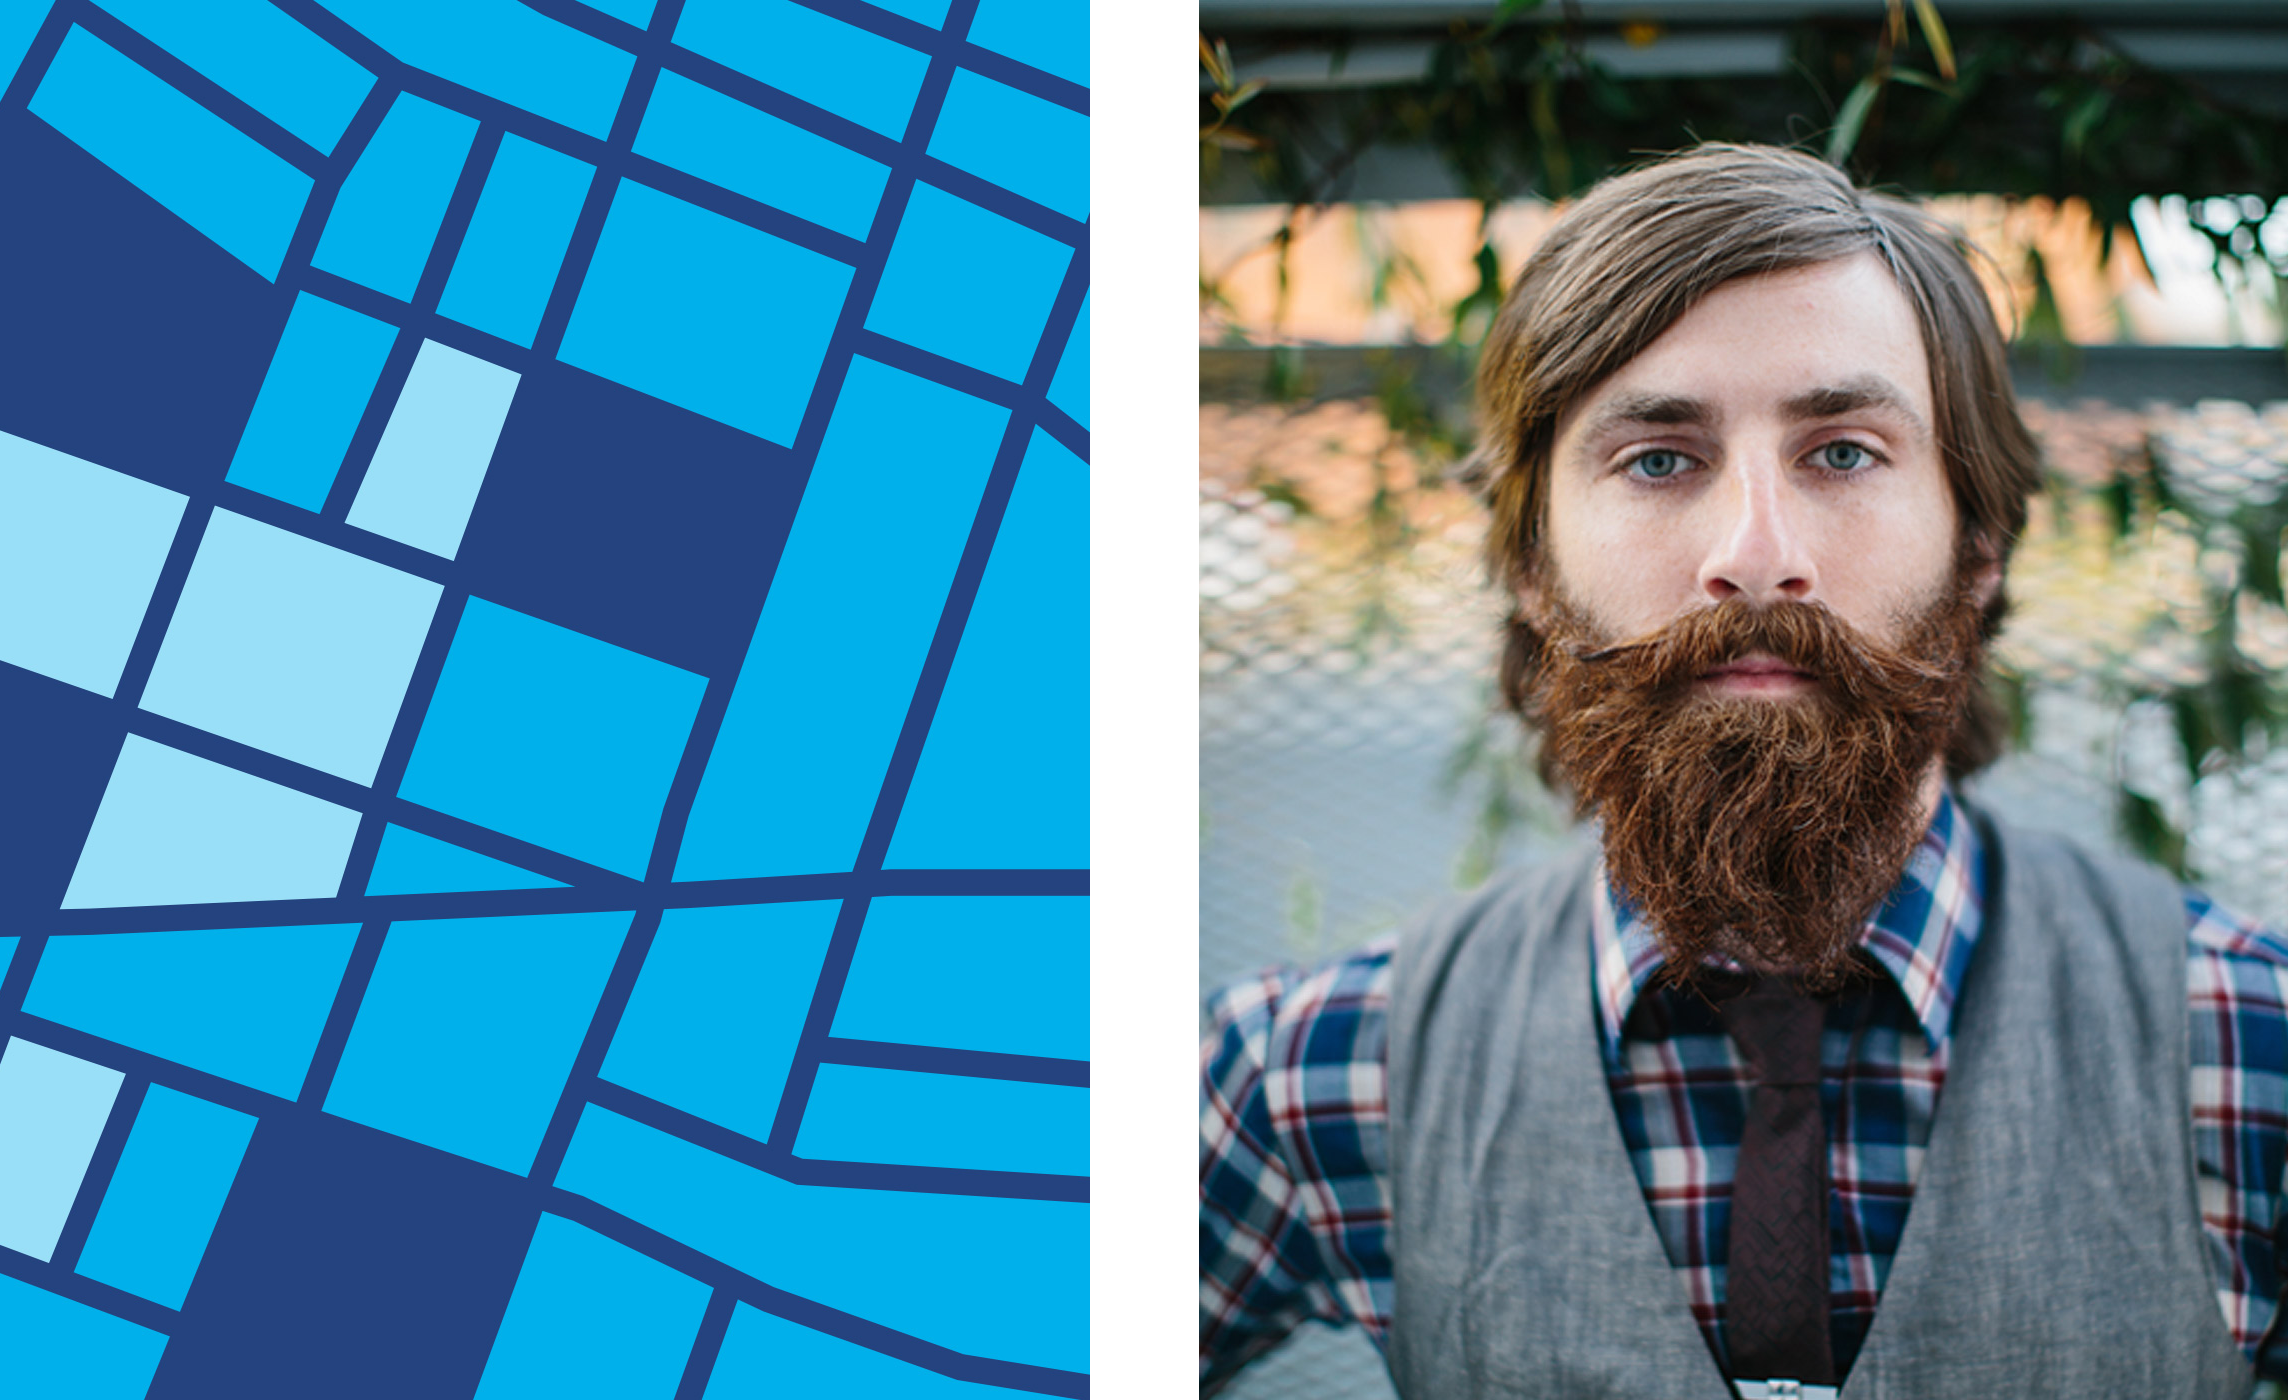 portrait of a white man 30s with heavy beard wearing a vest and plaid shirt next to blue city street graphic